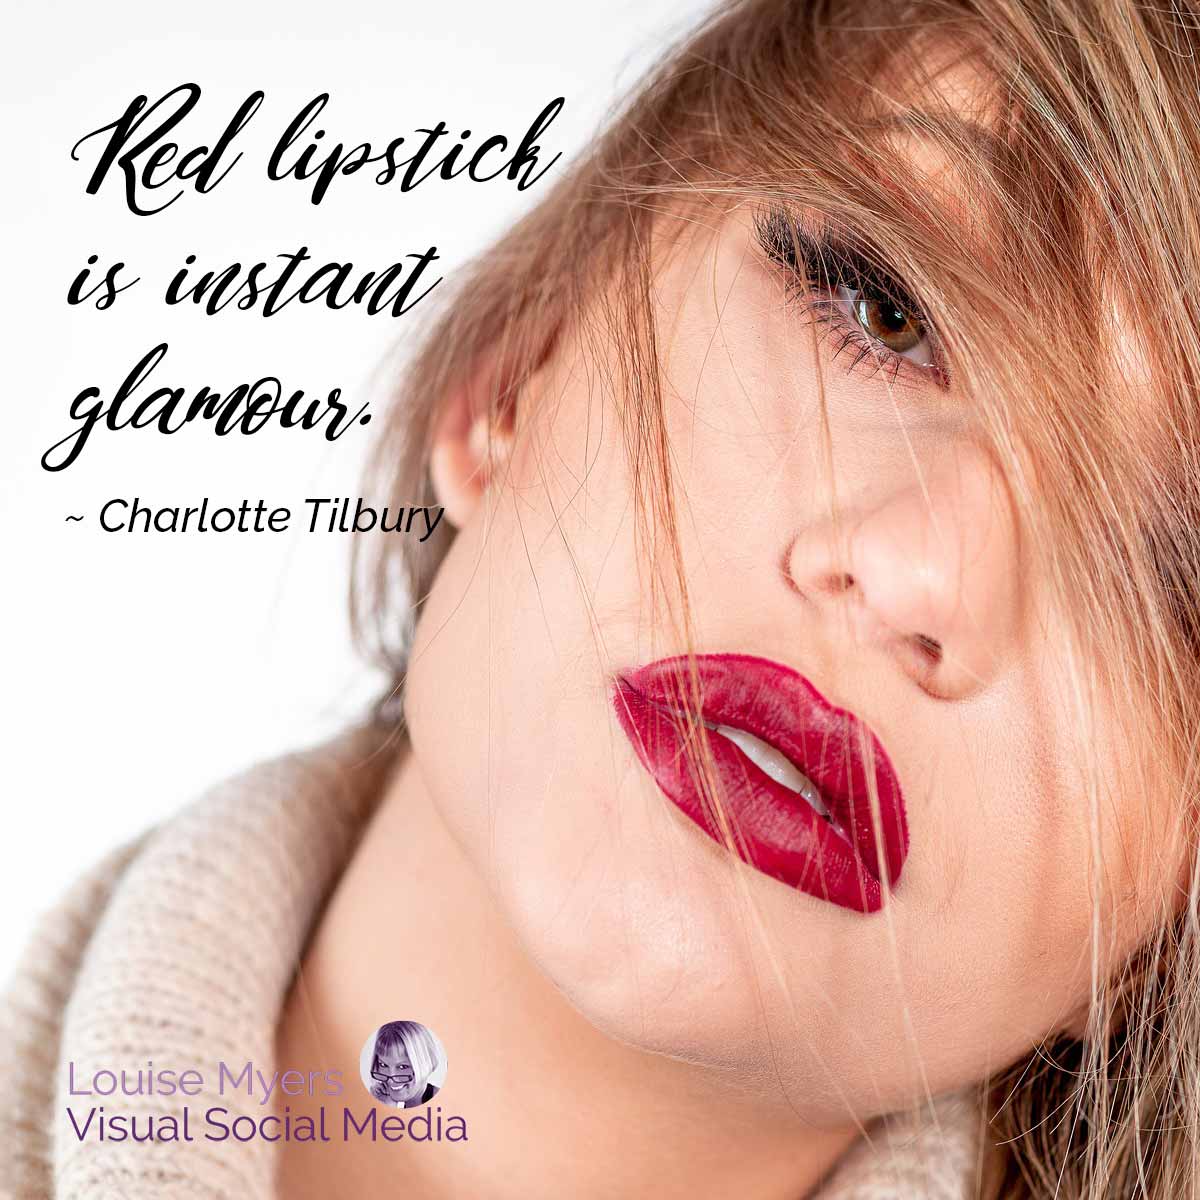 sophisticated woman with full red lips has quote, Red lipstick is instant glamour.